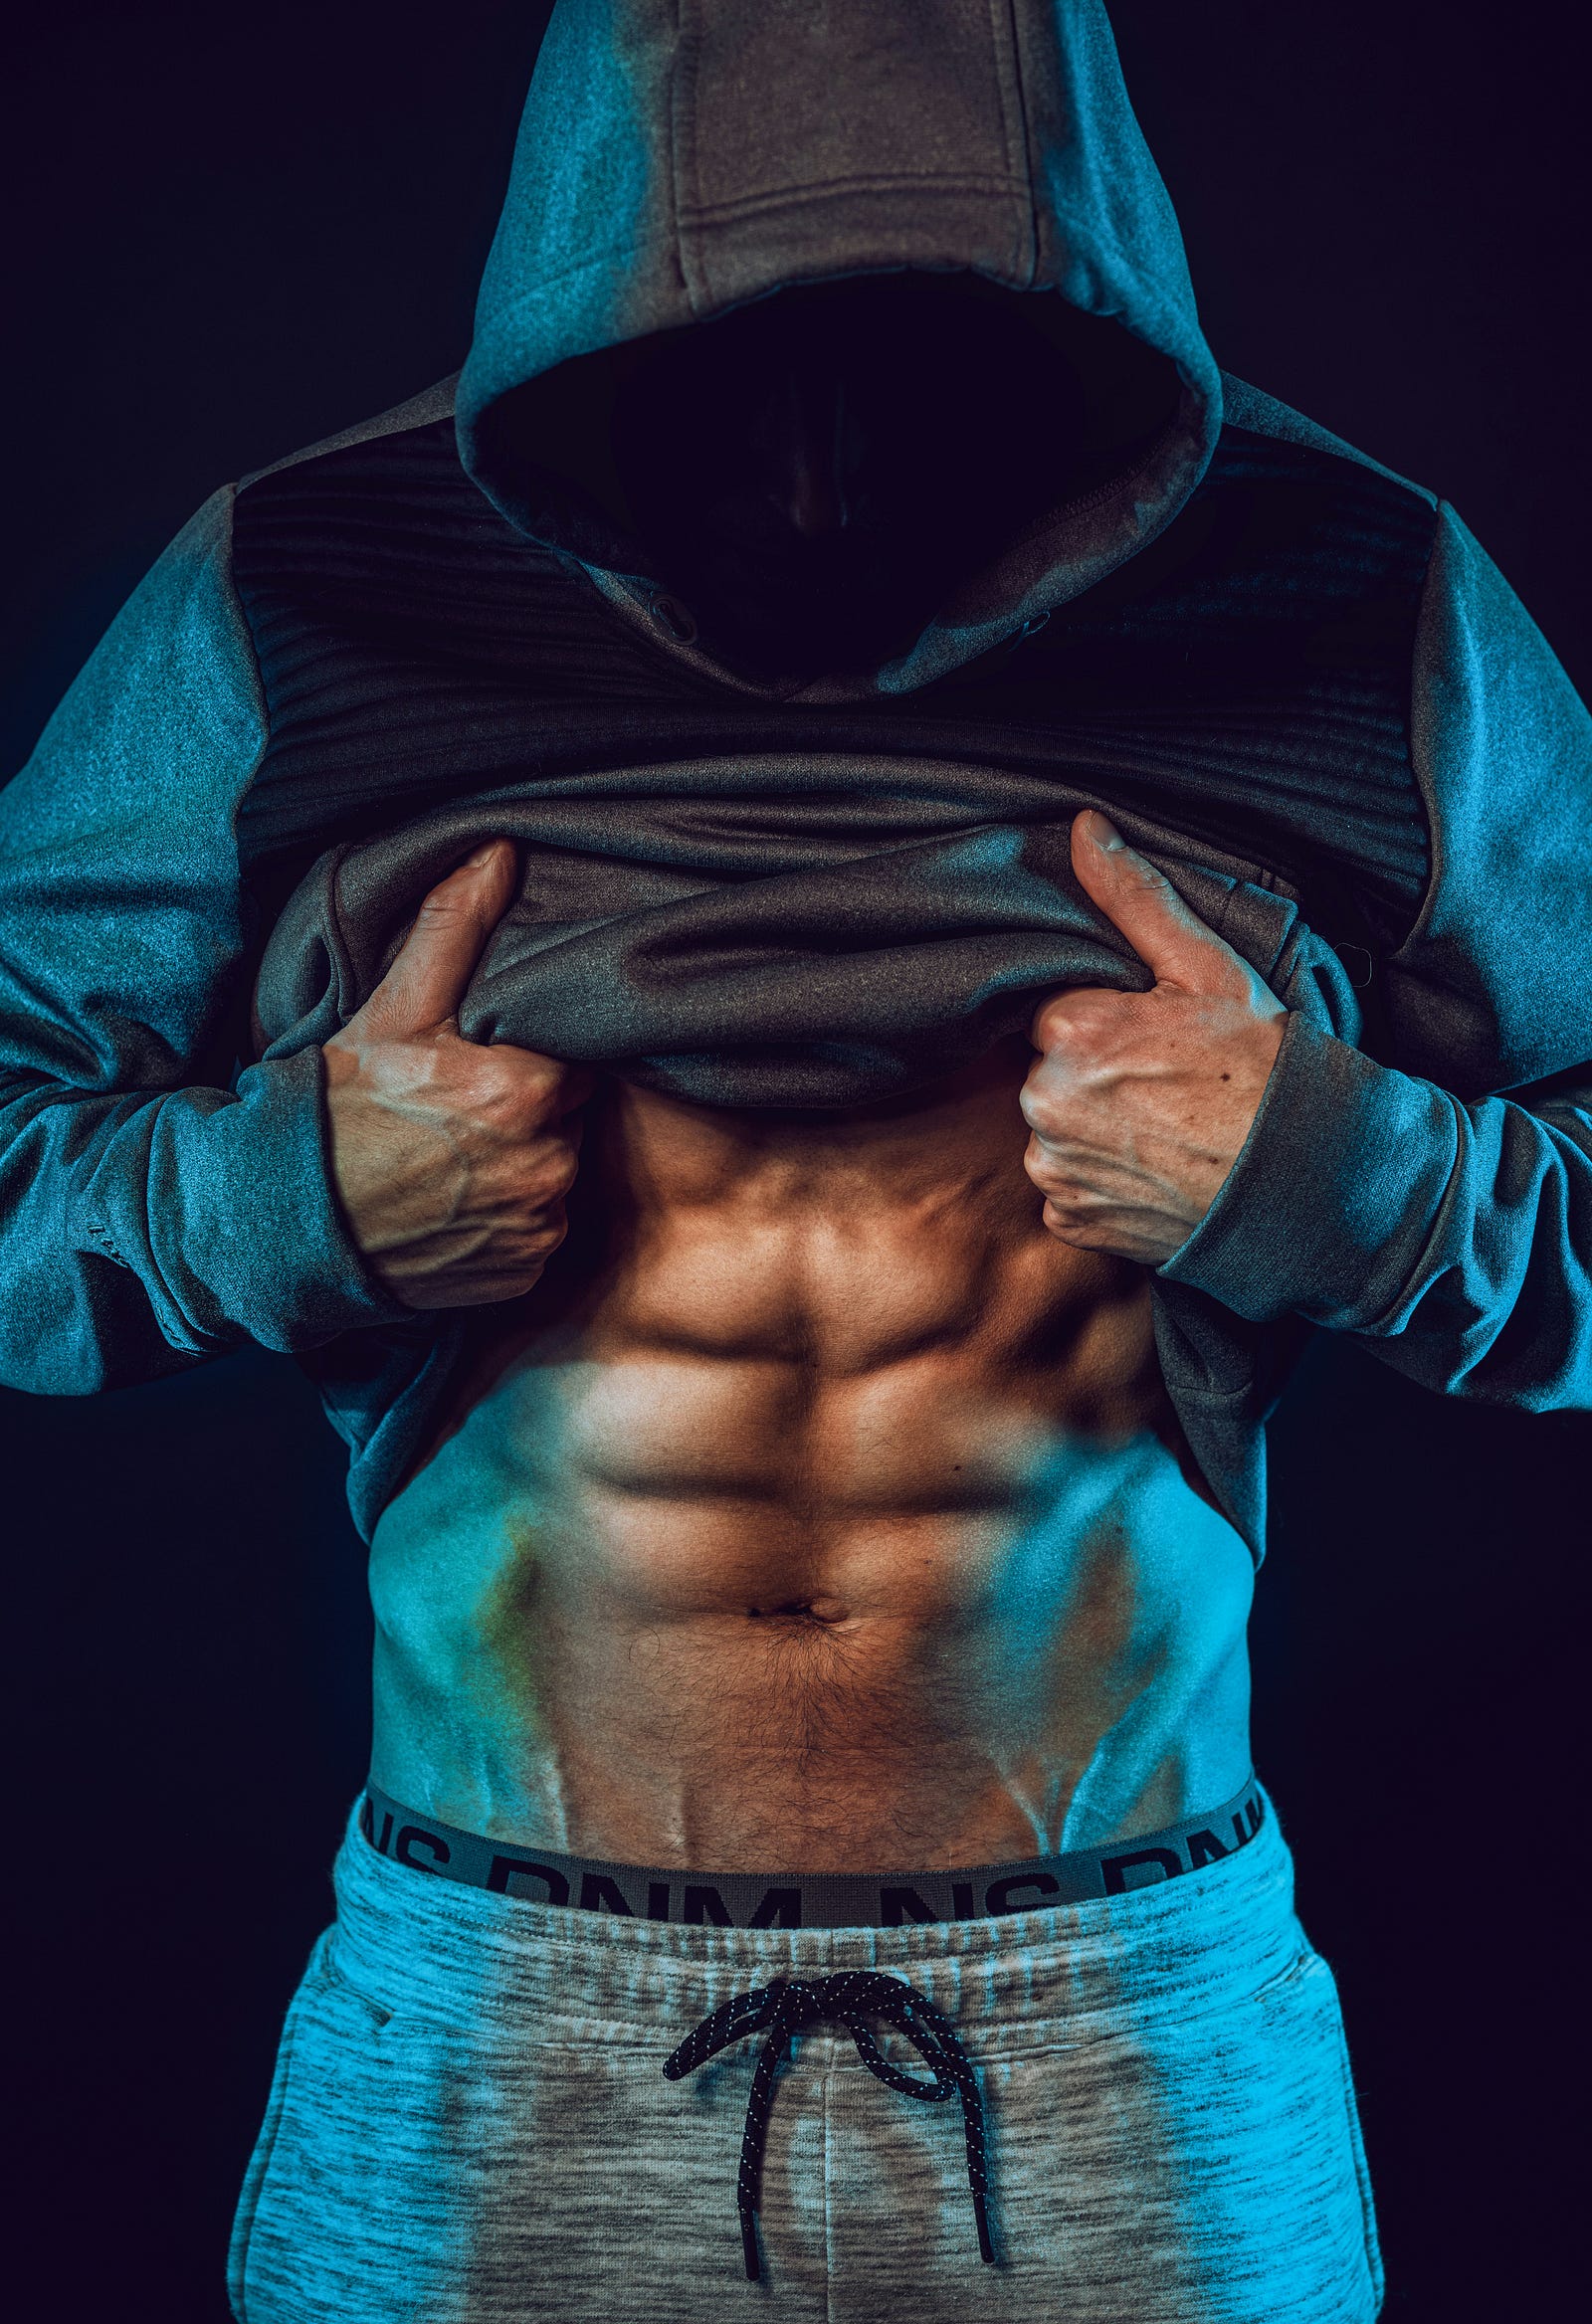 A man pulls up his shirt to reveal an abdominal six-pack.